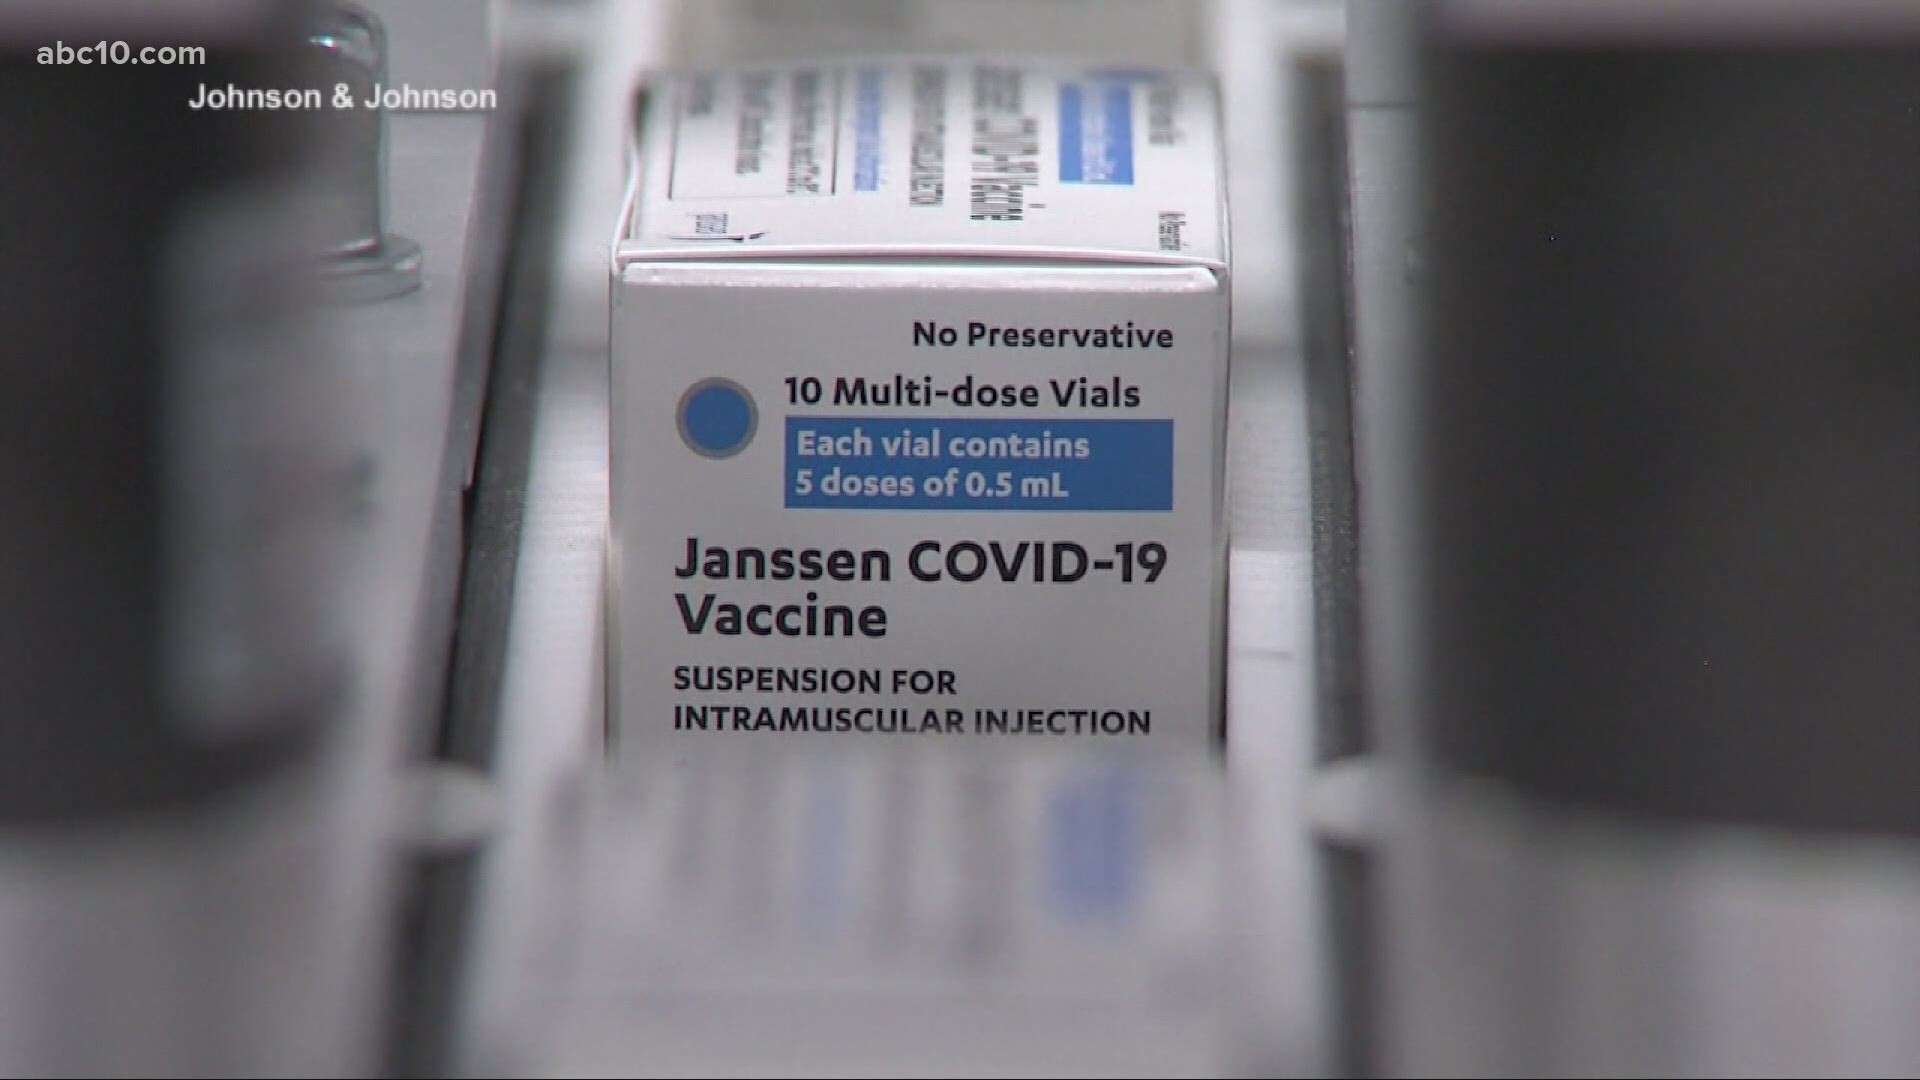 ABC10 Medical Expert Dr. Payal Kohli explains that people do not need to panic if they got the single-dose Johnson & Johnson shot, but to watch for symptoms.